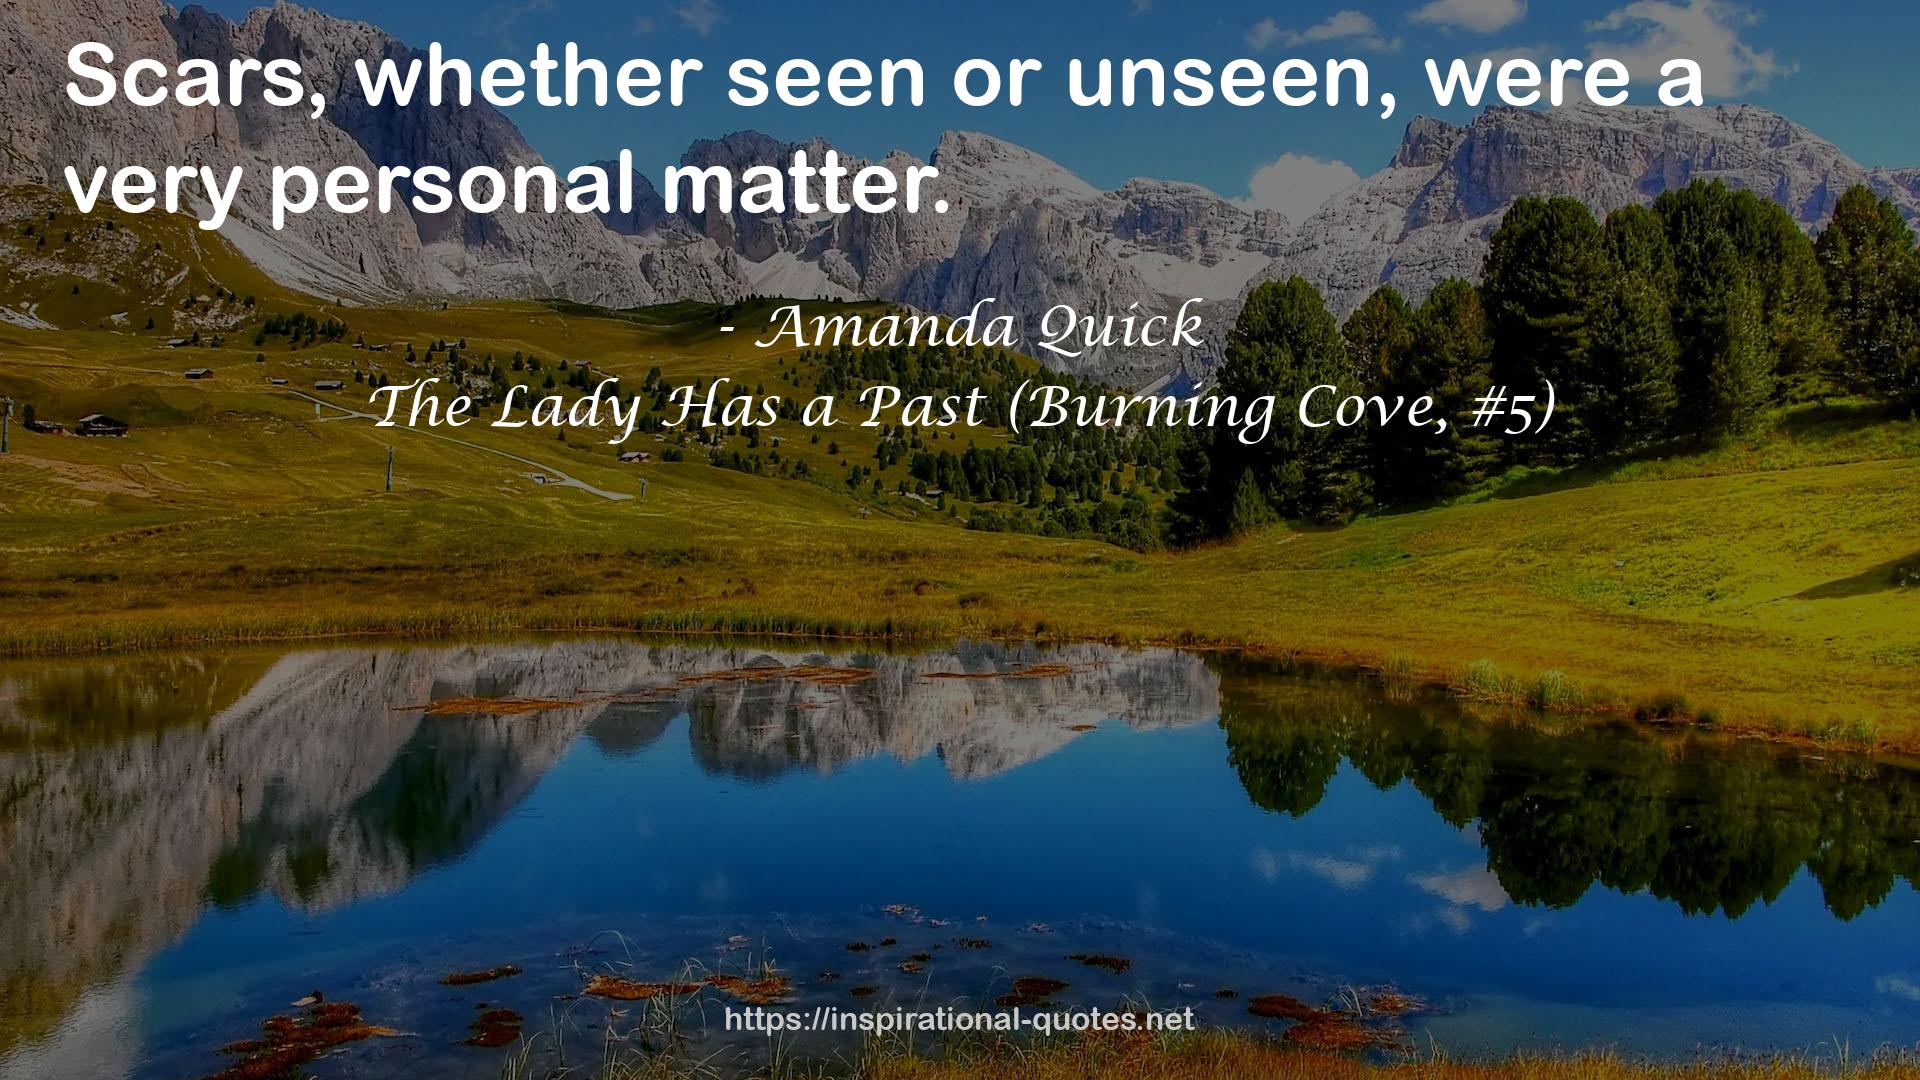 The Lady Has a Past (Burning Cove, #5) QUOTES